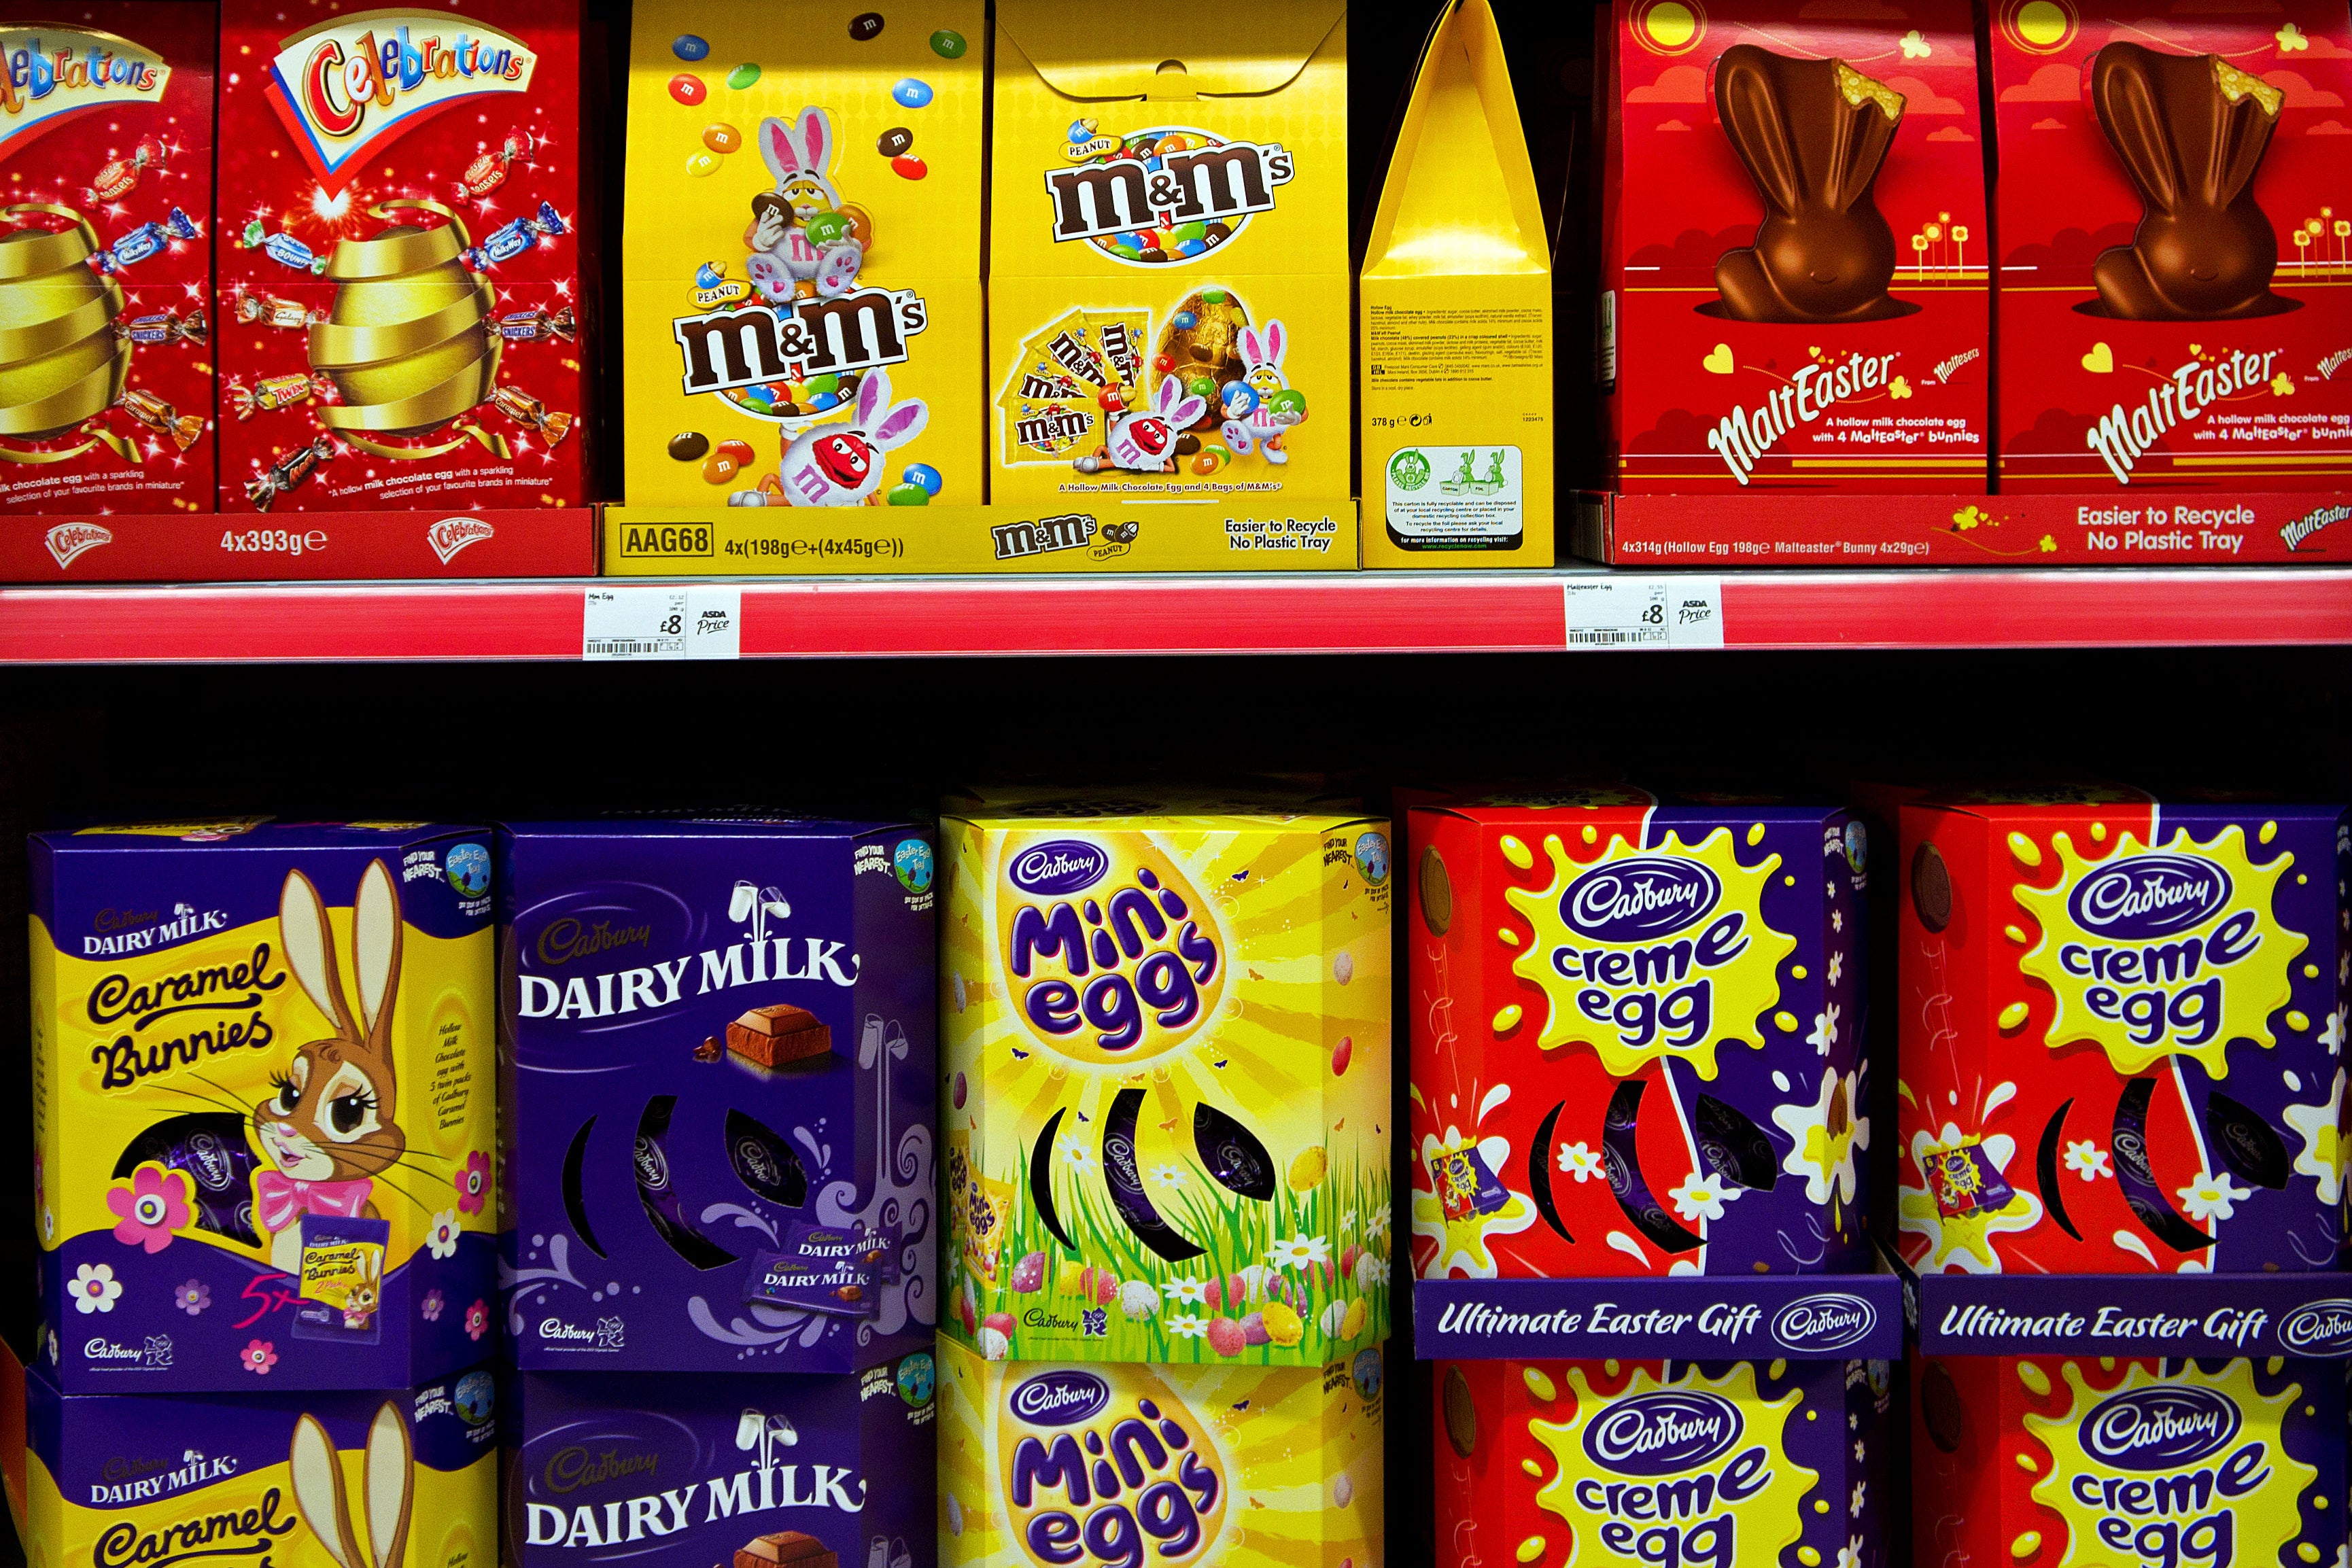 An NHS doctor urged people not to eat a whole Easter egg at once